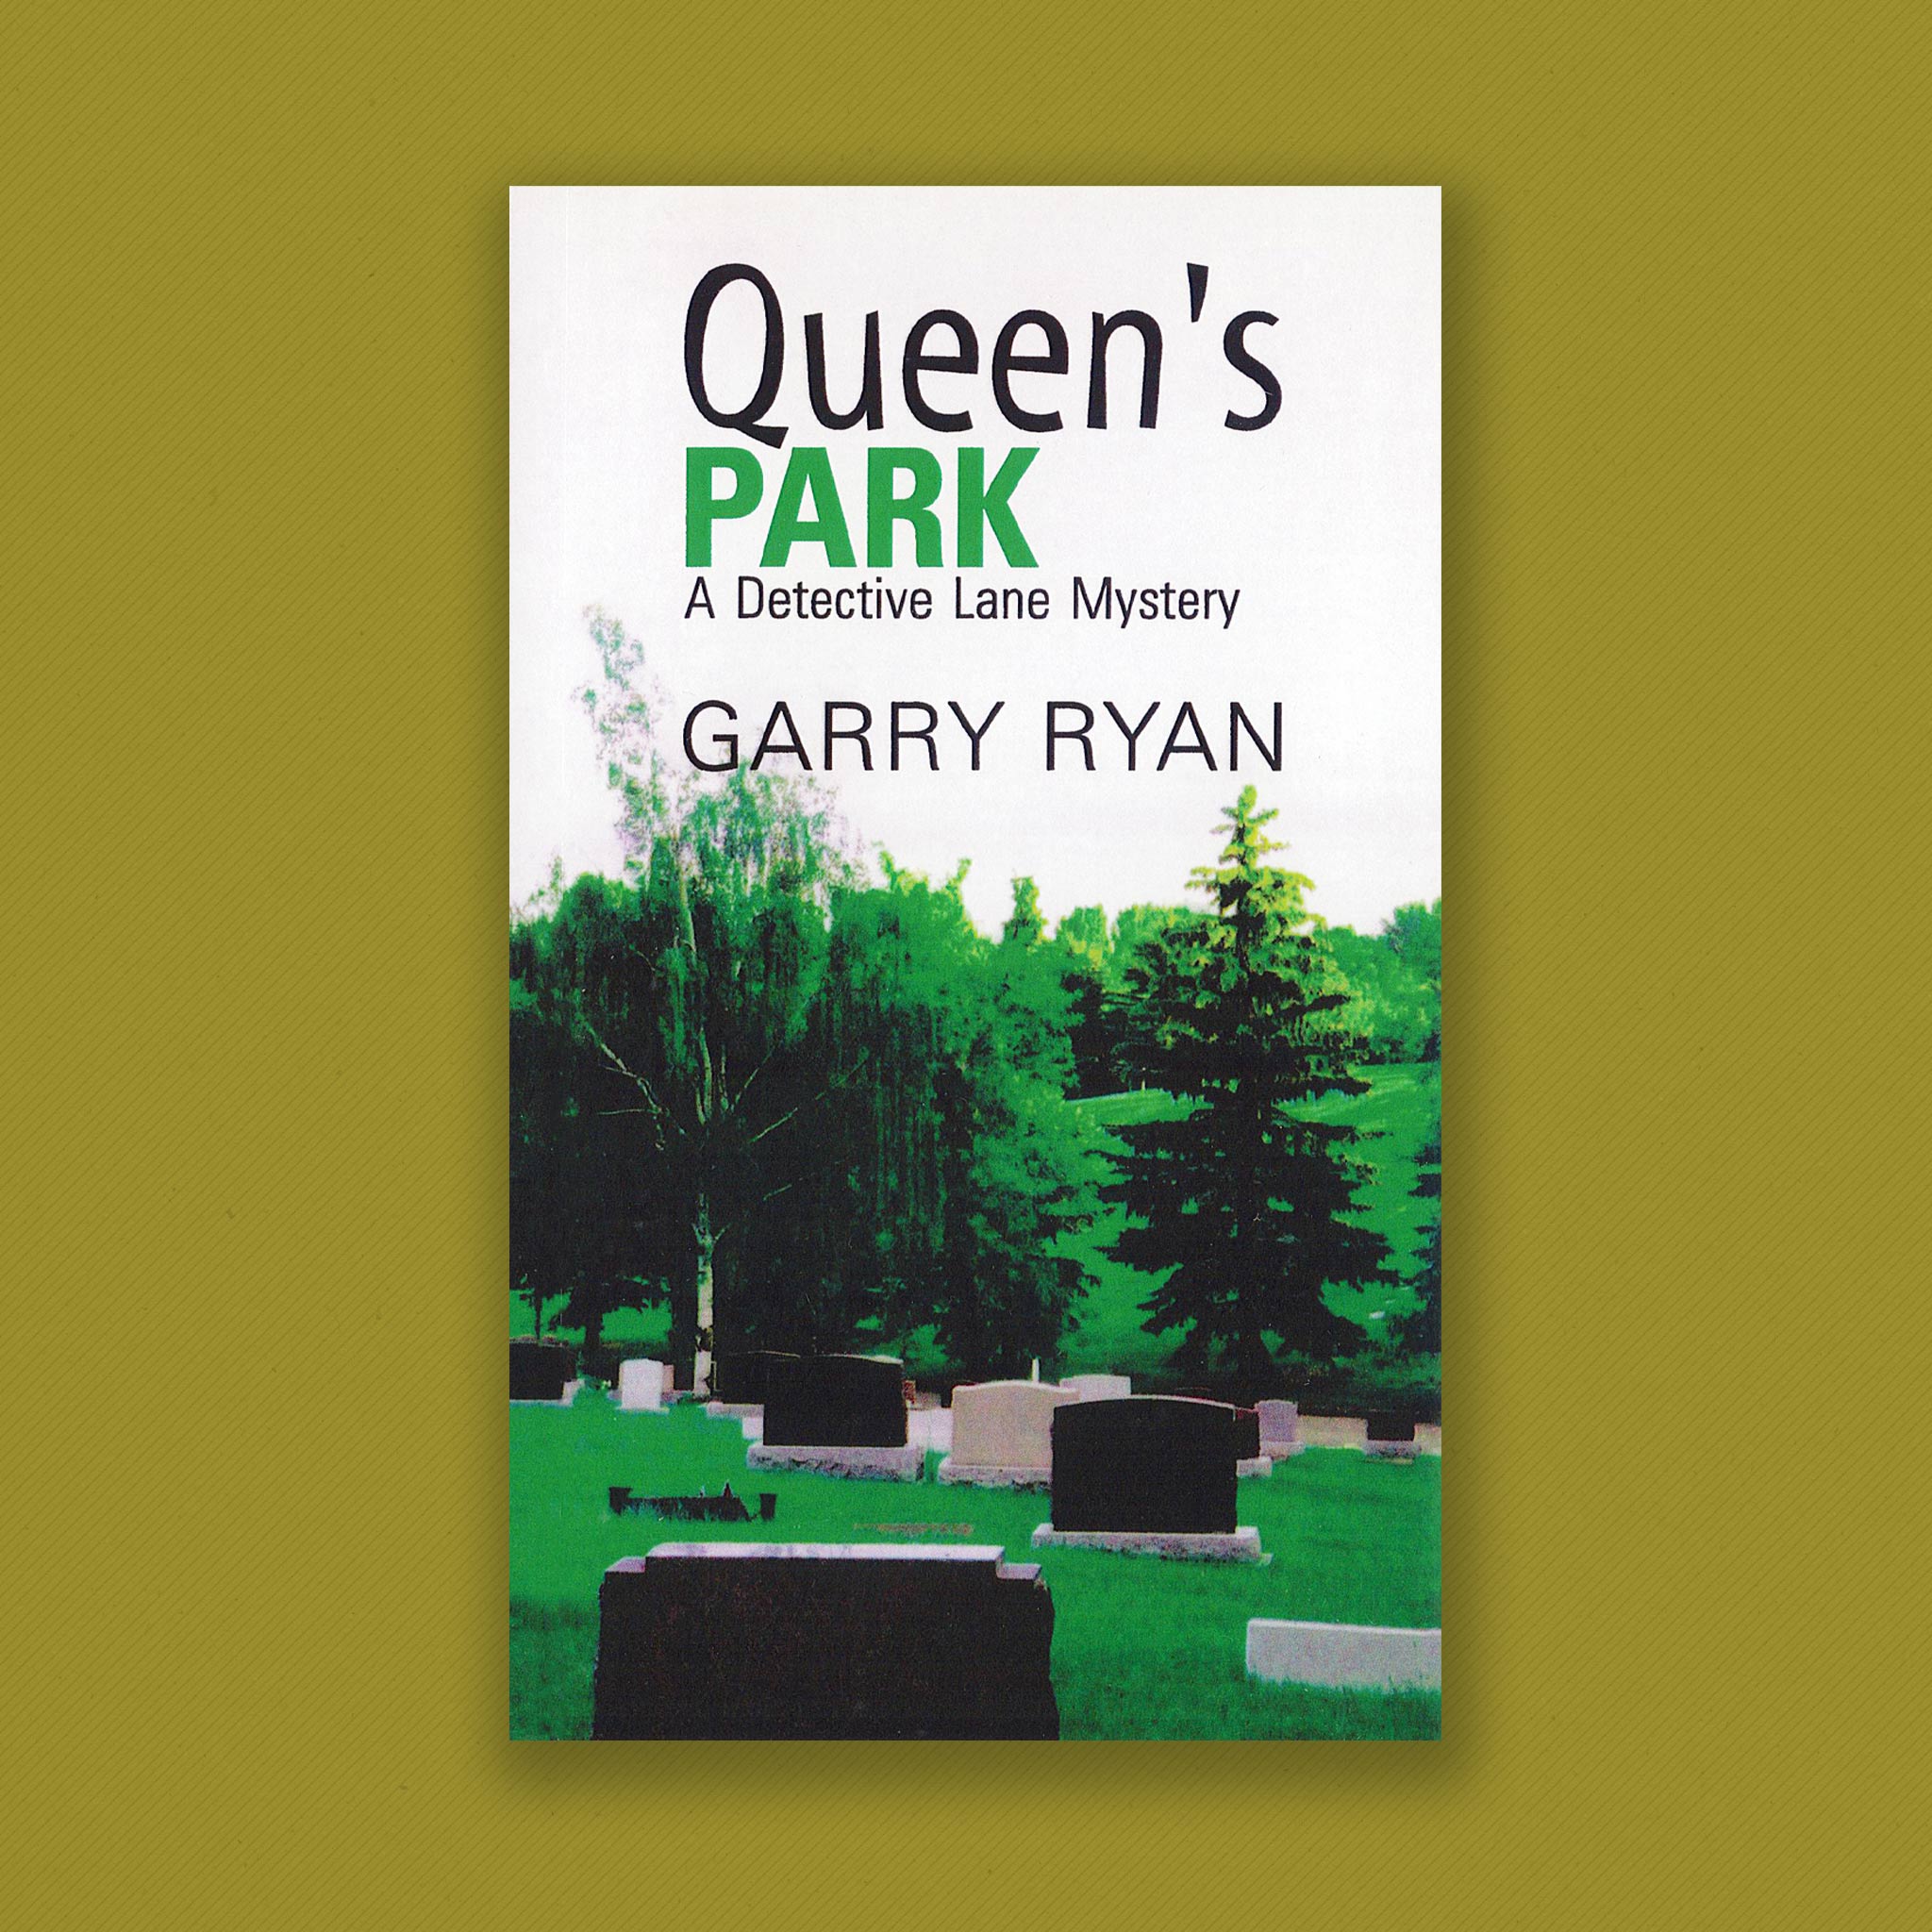 Queen's Park: A Detective Lane Mystery